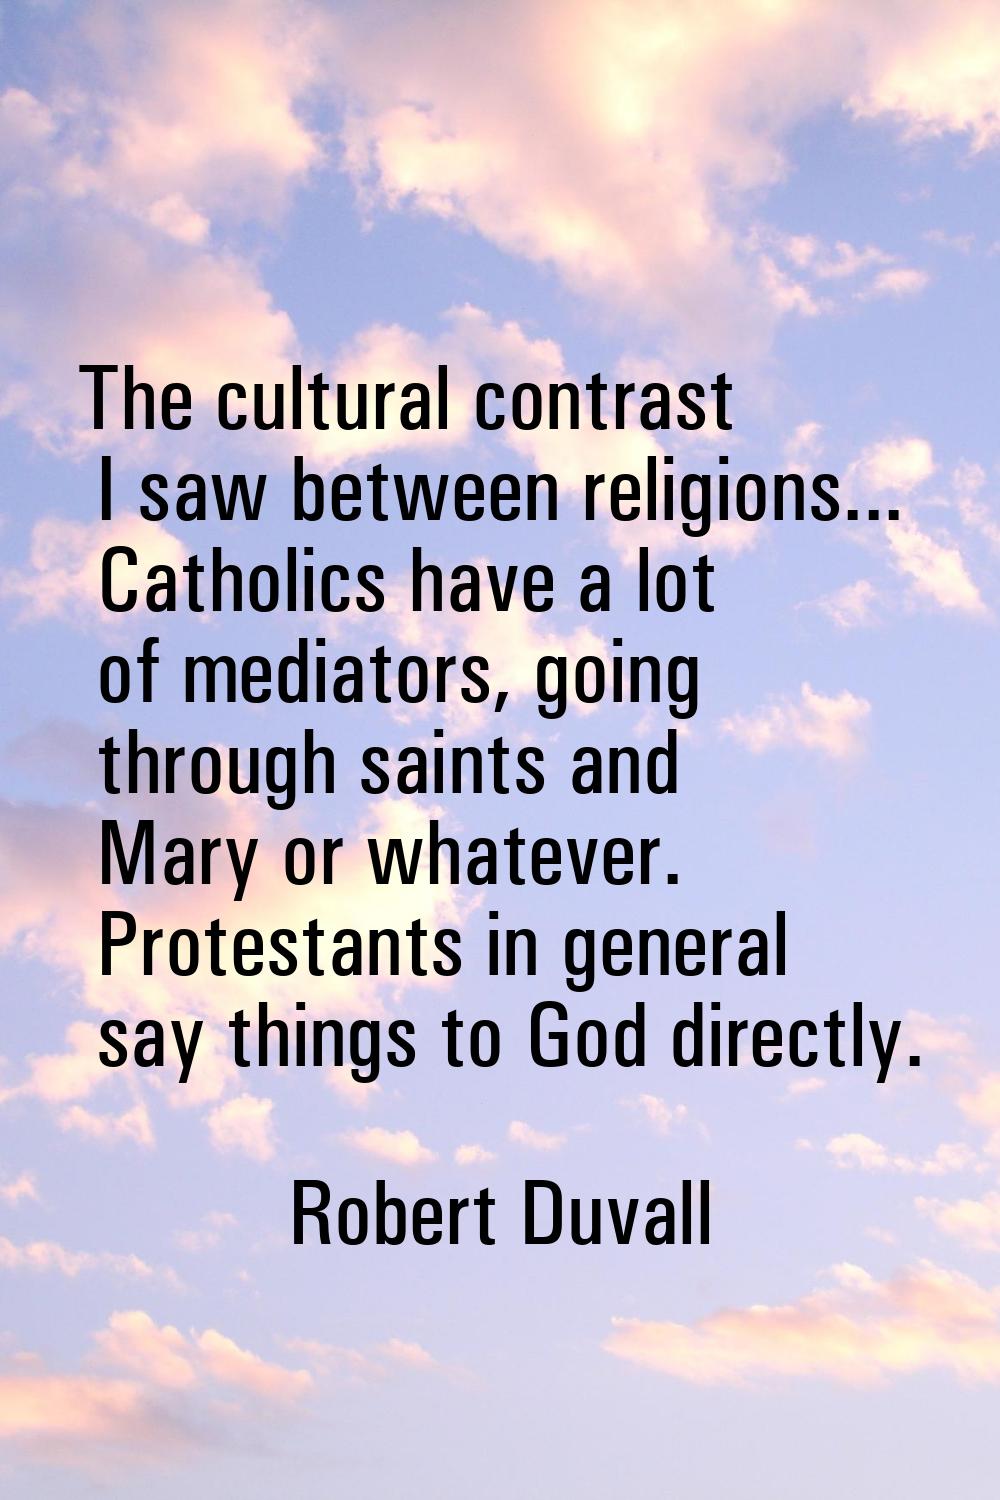 The cultural contrast I saw between religions... Catholics have a lot of mediators, going through s